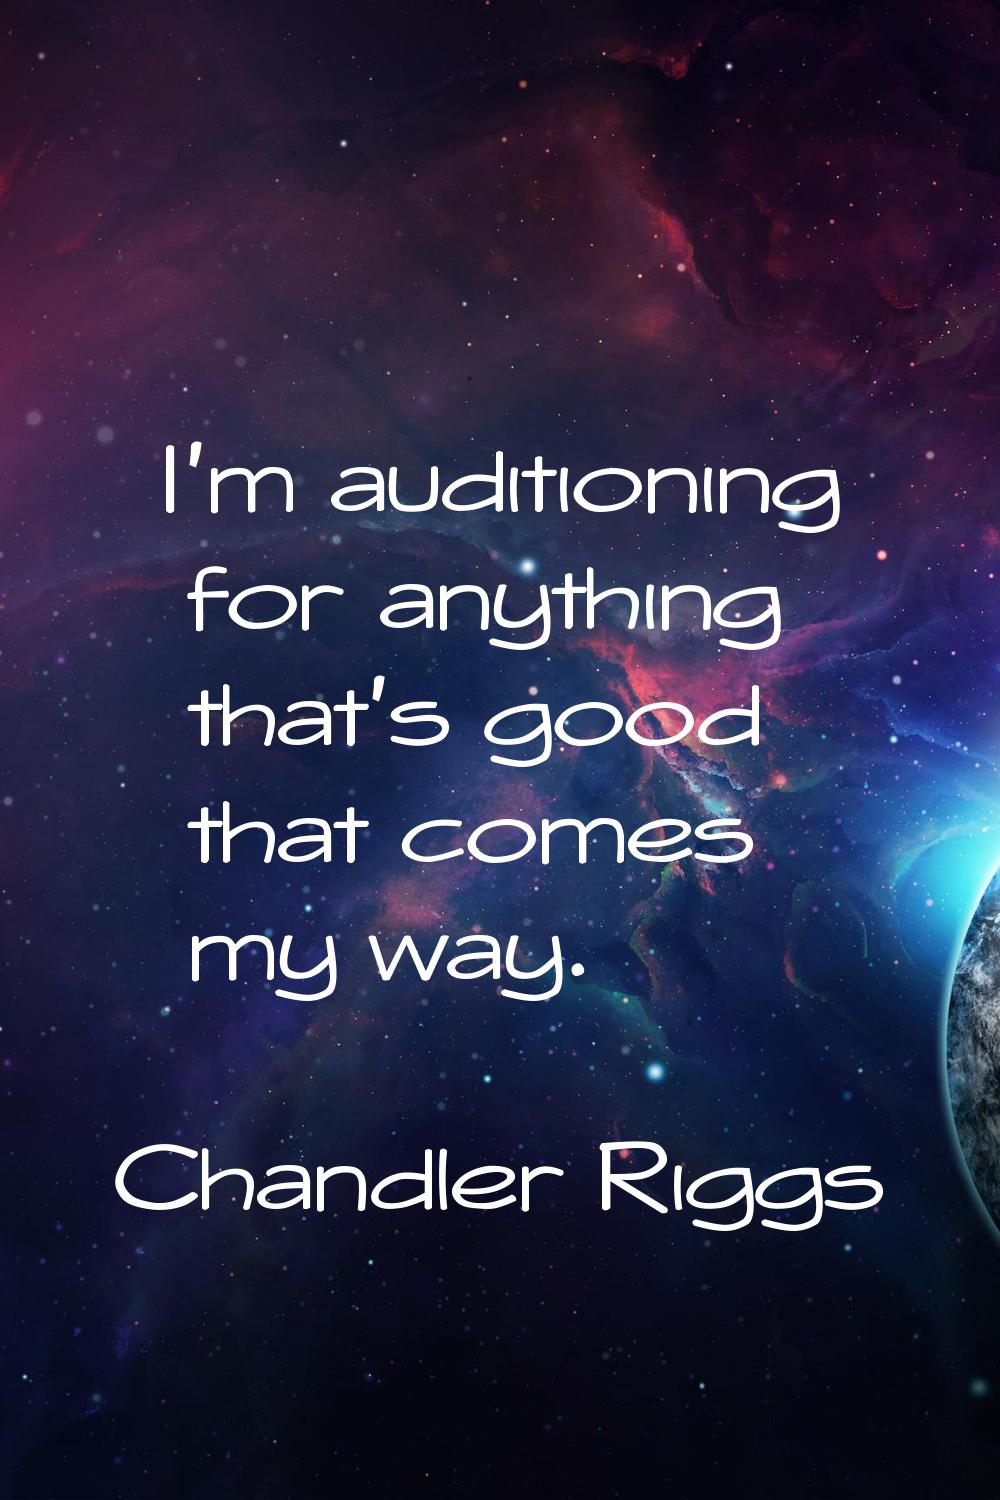 I'm auditioning for anything that's good that comes my way.